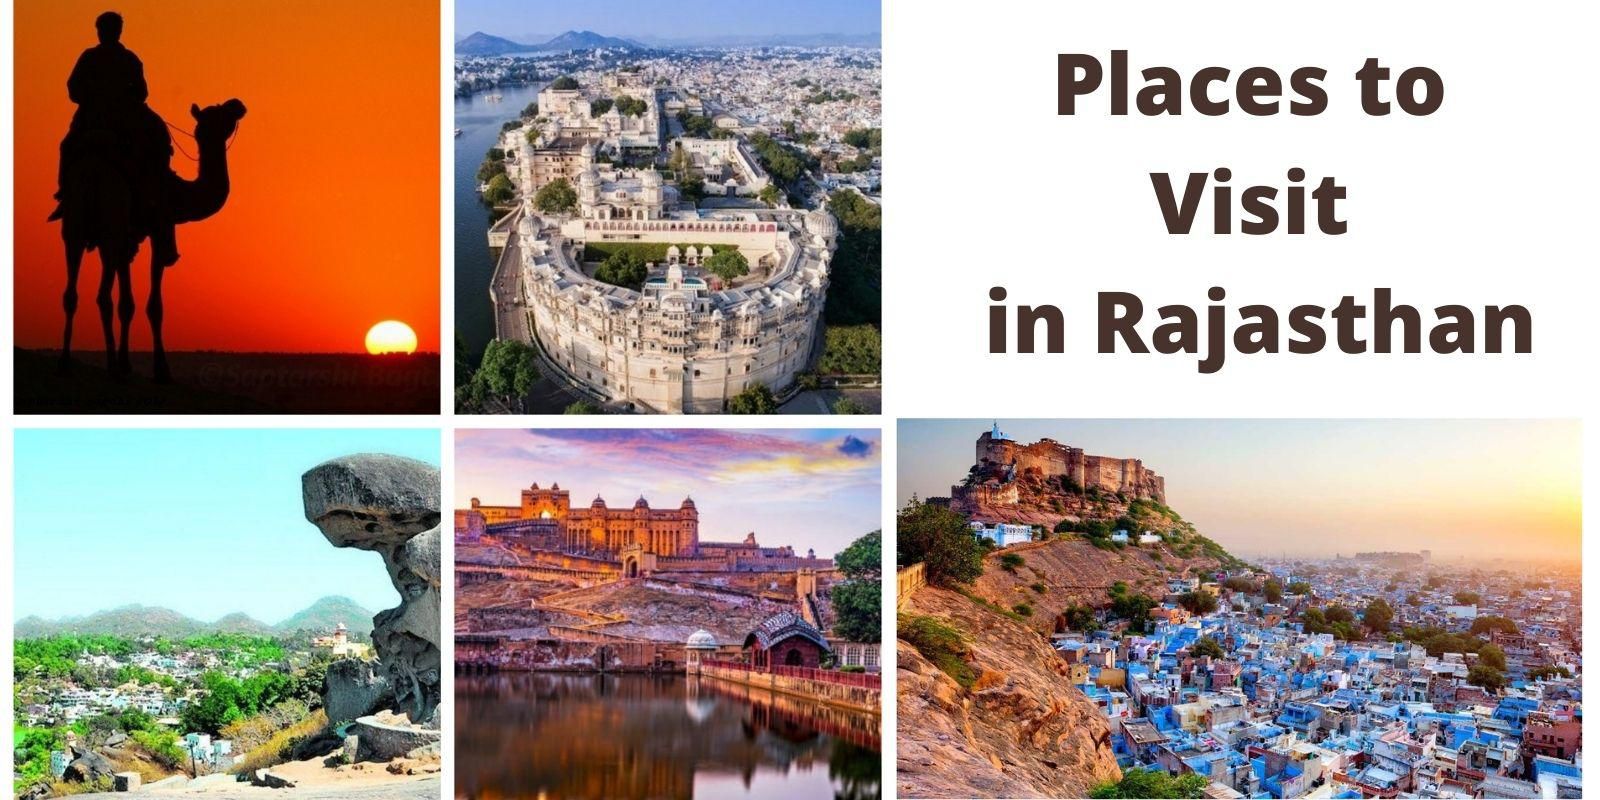 10 Places to visit in Rajasthan for a Surreal Experience